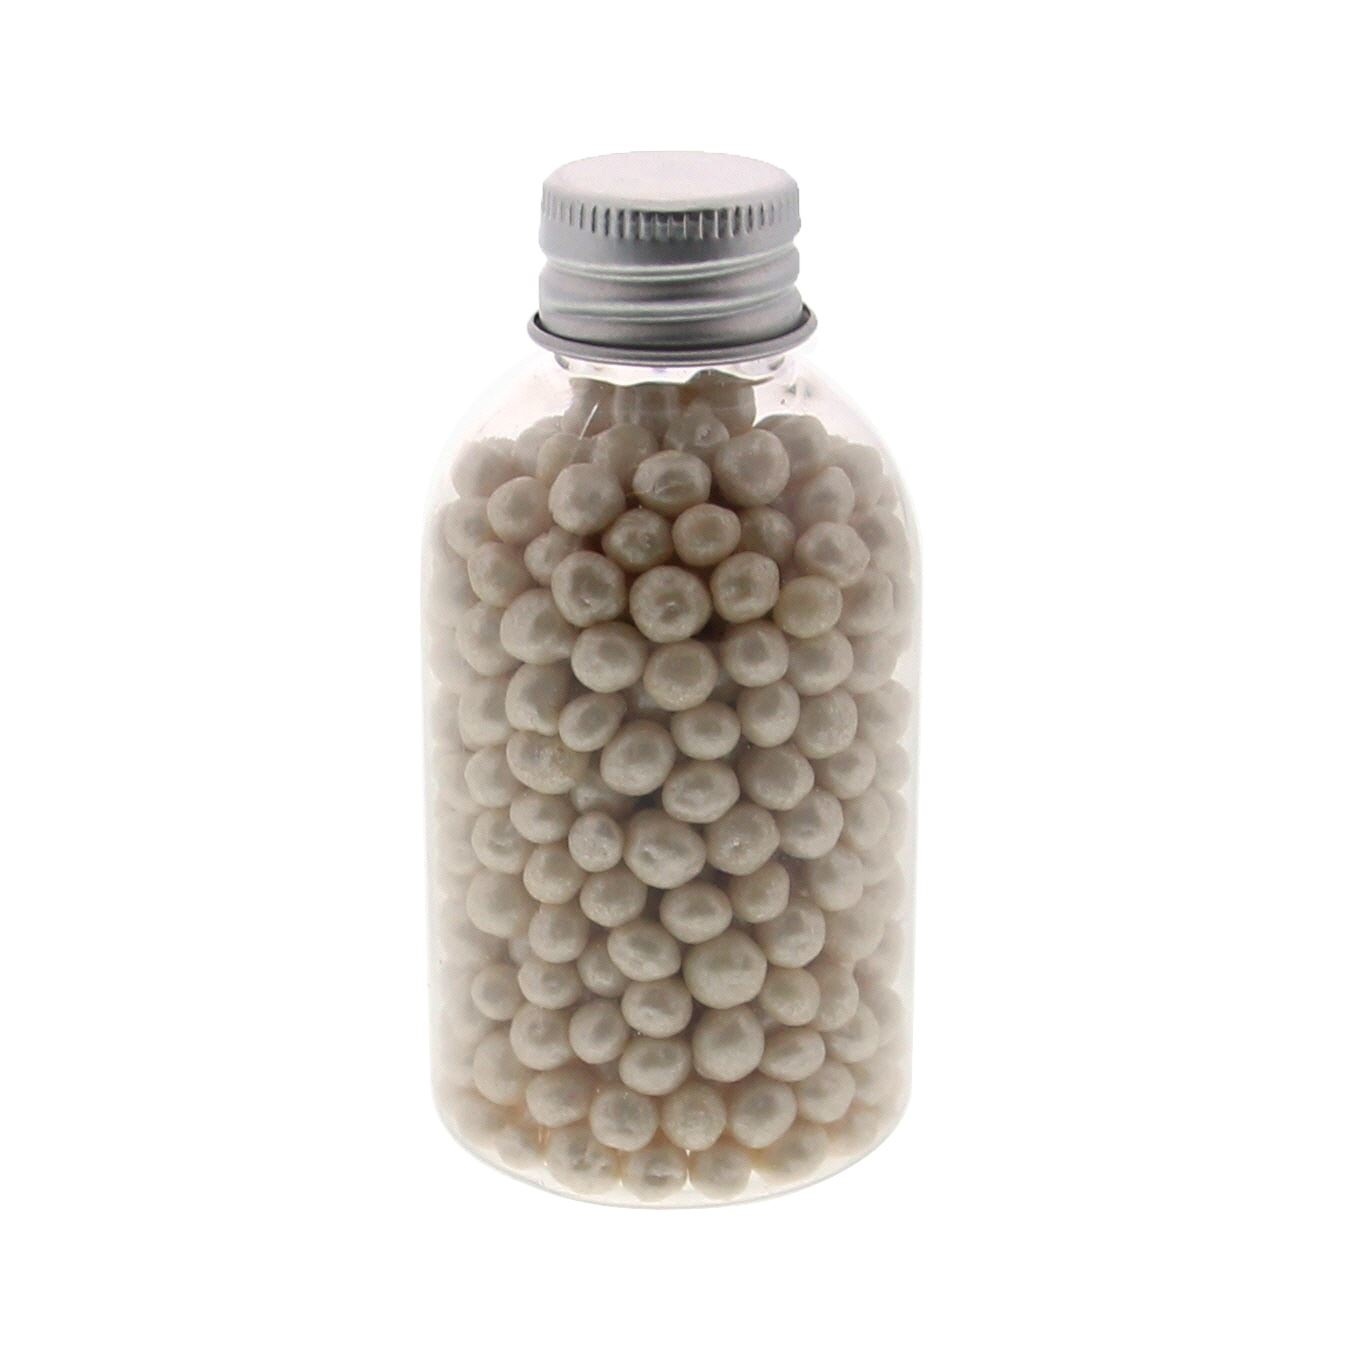 PVC bottle rounded with silver cap - 39 *39* 78mm - 100 pieces